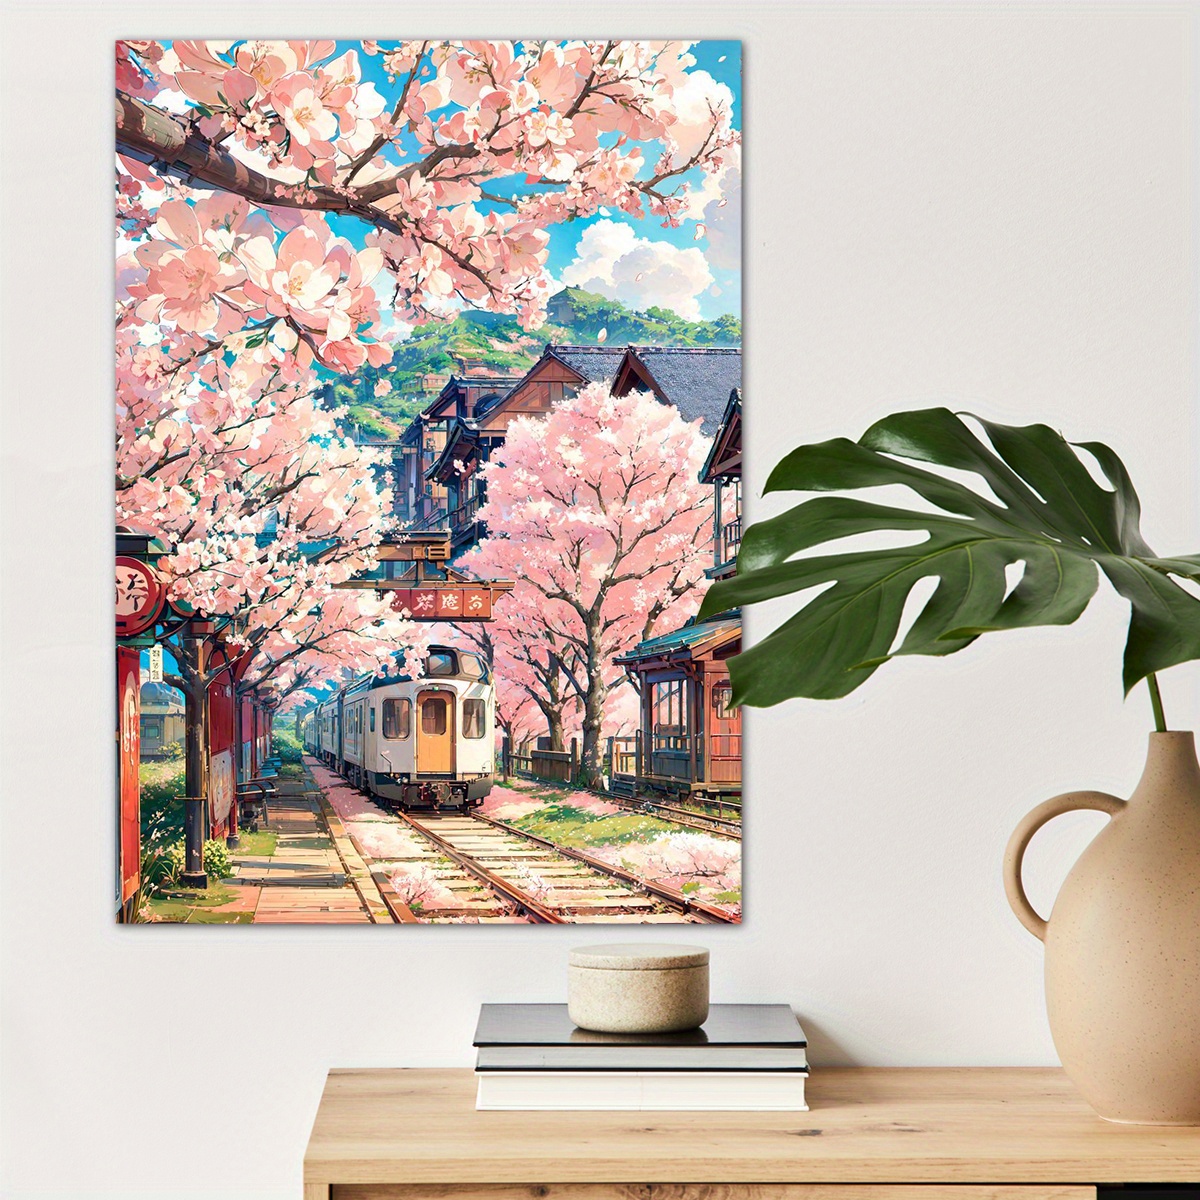 

1pc Train And Flowers Canvas Wall Art For Home Decor, High Quality Wall Decor, Pink Cherry Canvas Prints For Living Room Bedroom Bathroom Kitchen Office Cafe Decor, Perfect Gift And Decoration